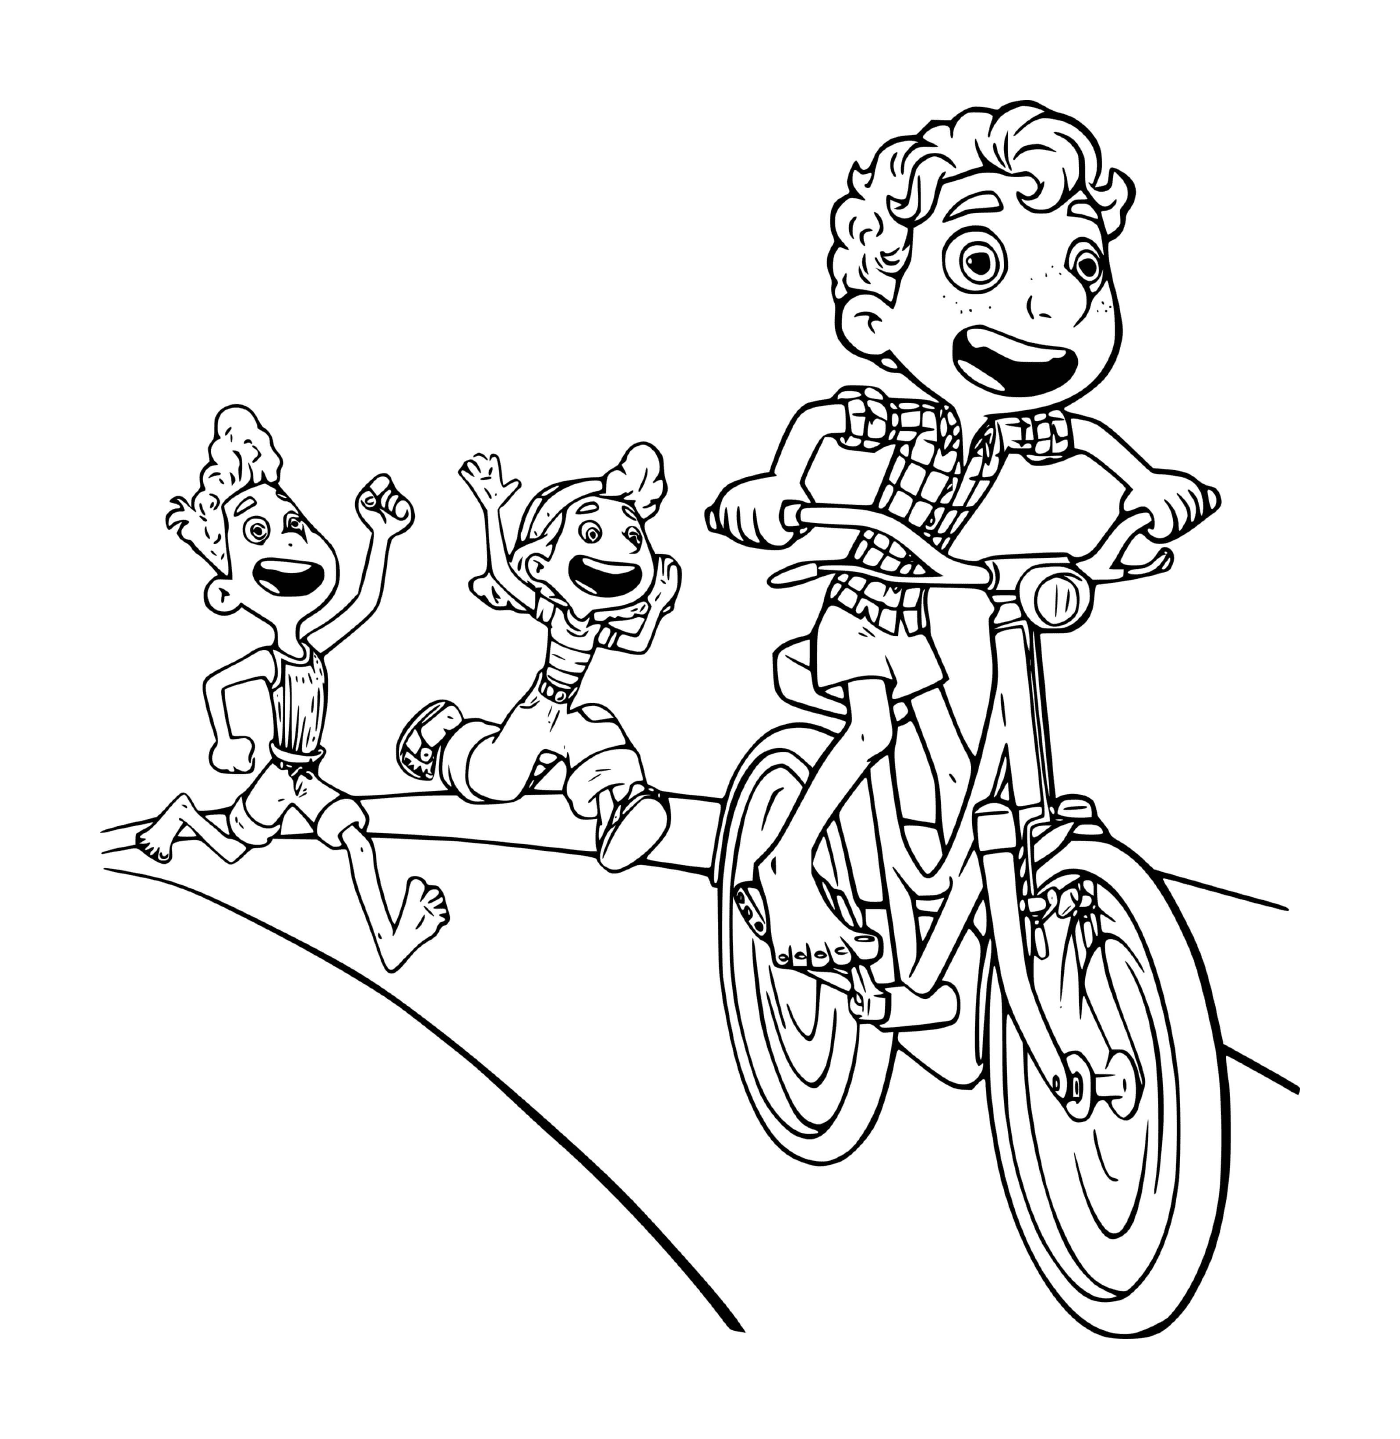 Luca Riding Bicycle with Giulia and Alberto